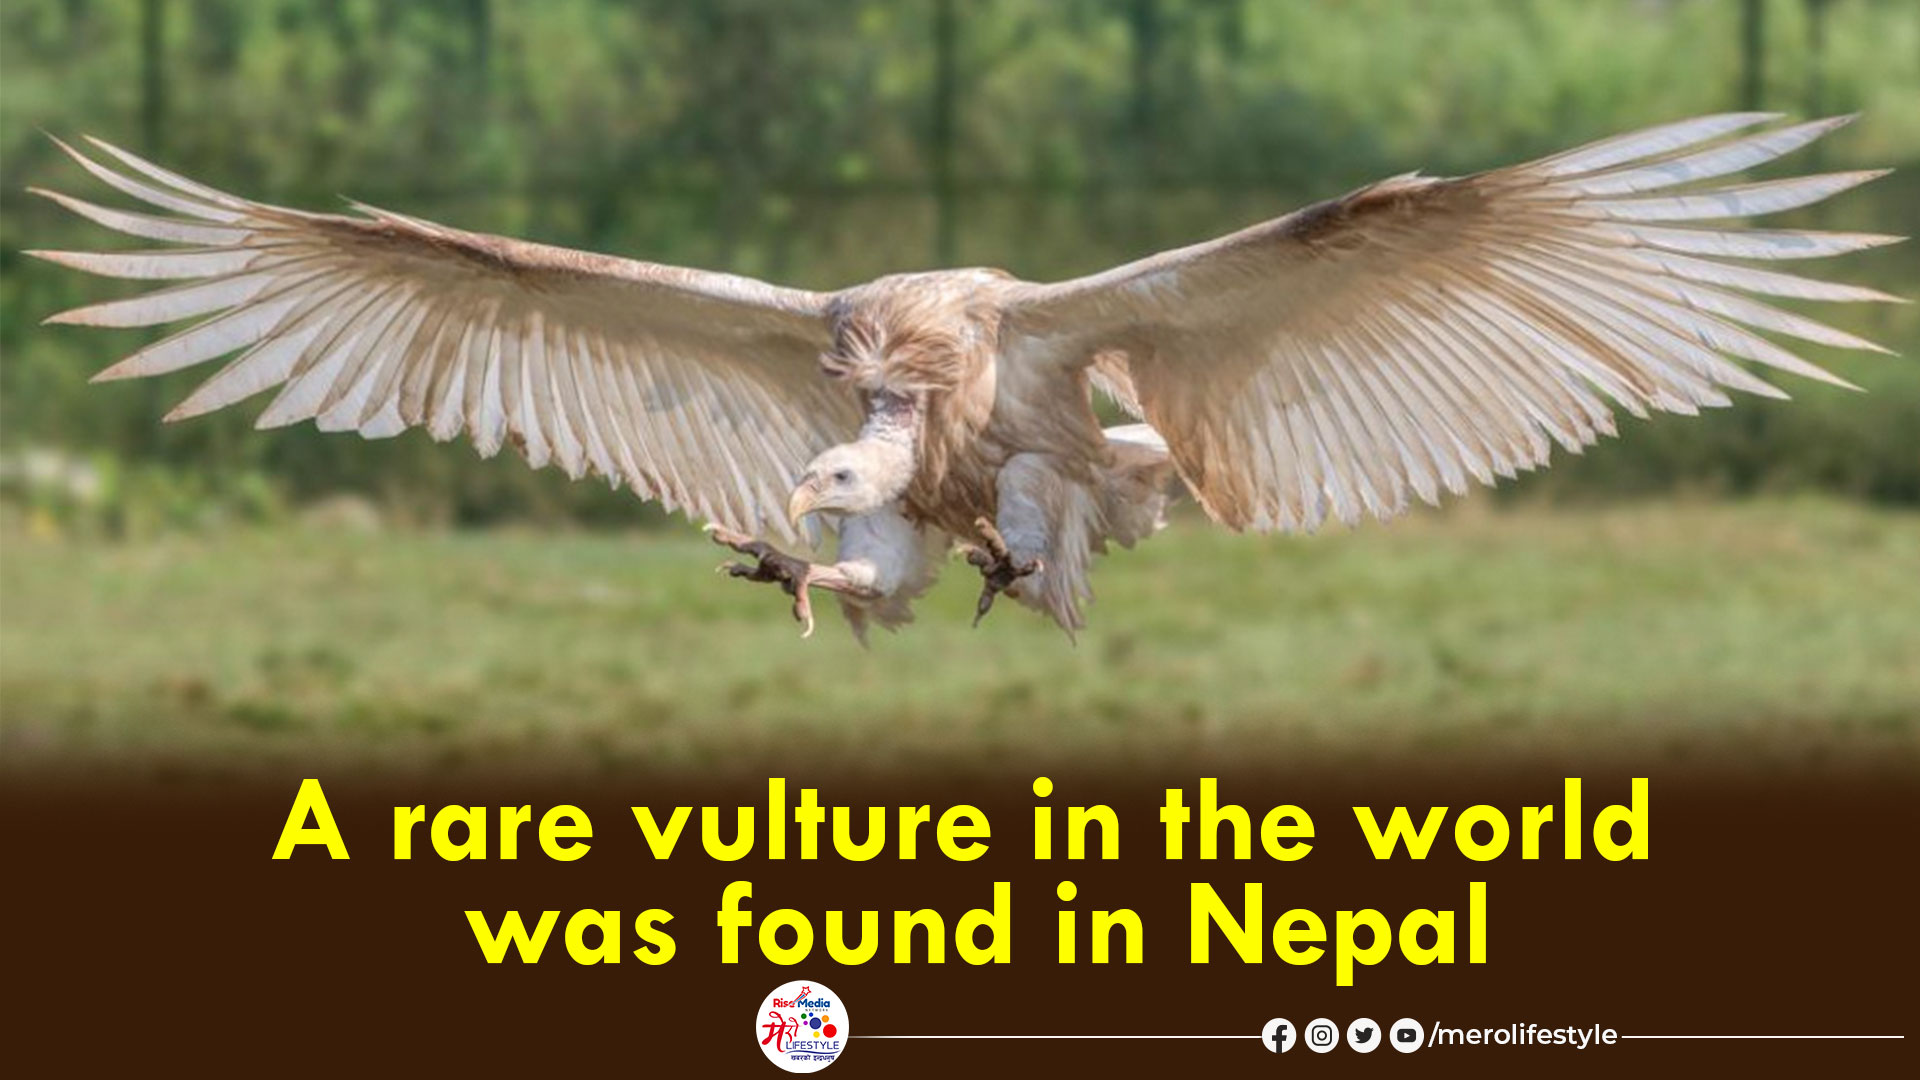 A rare vulture in the world was found in Nepal